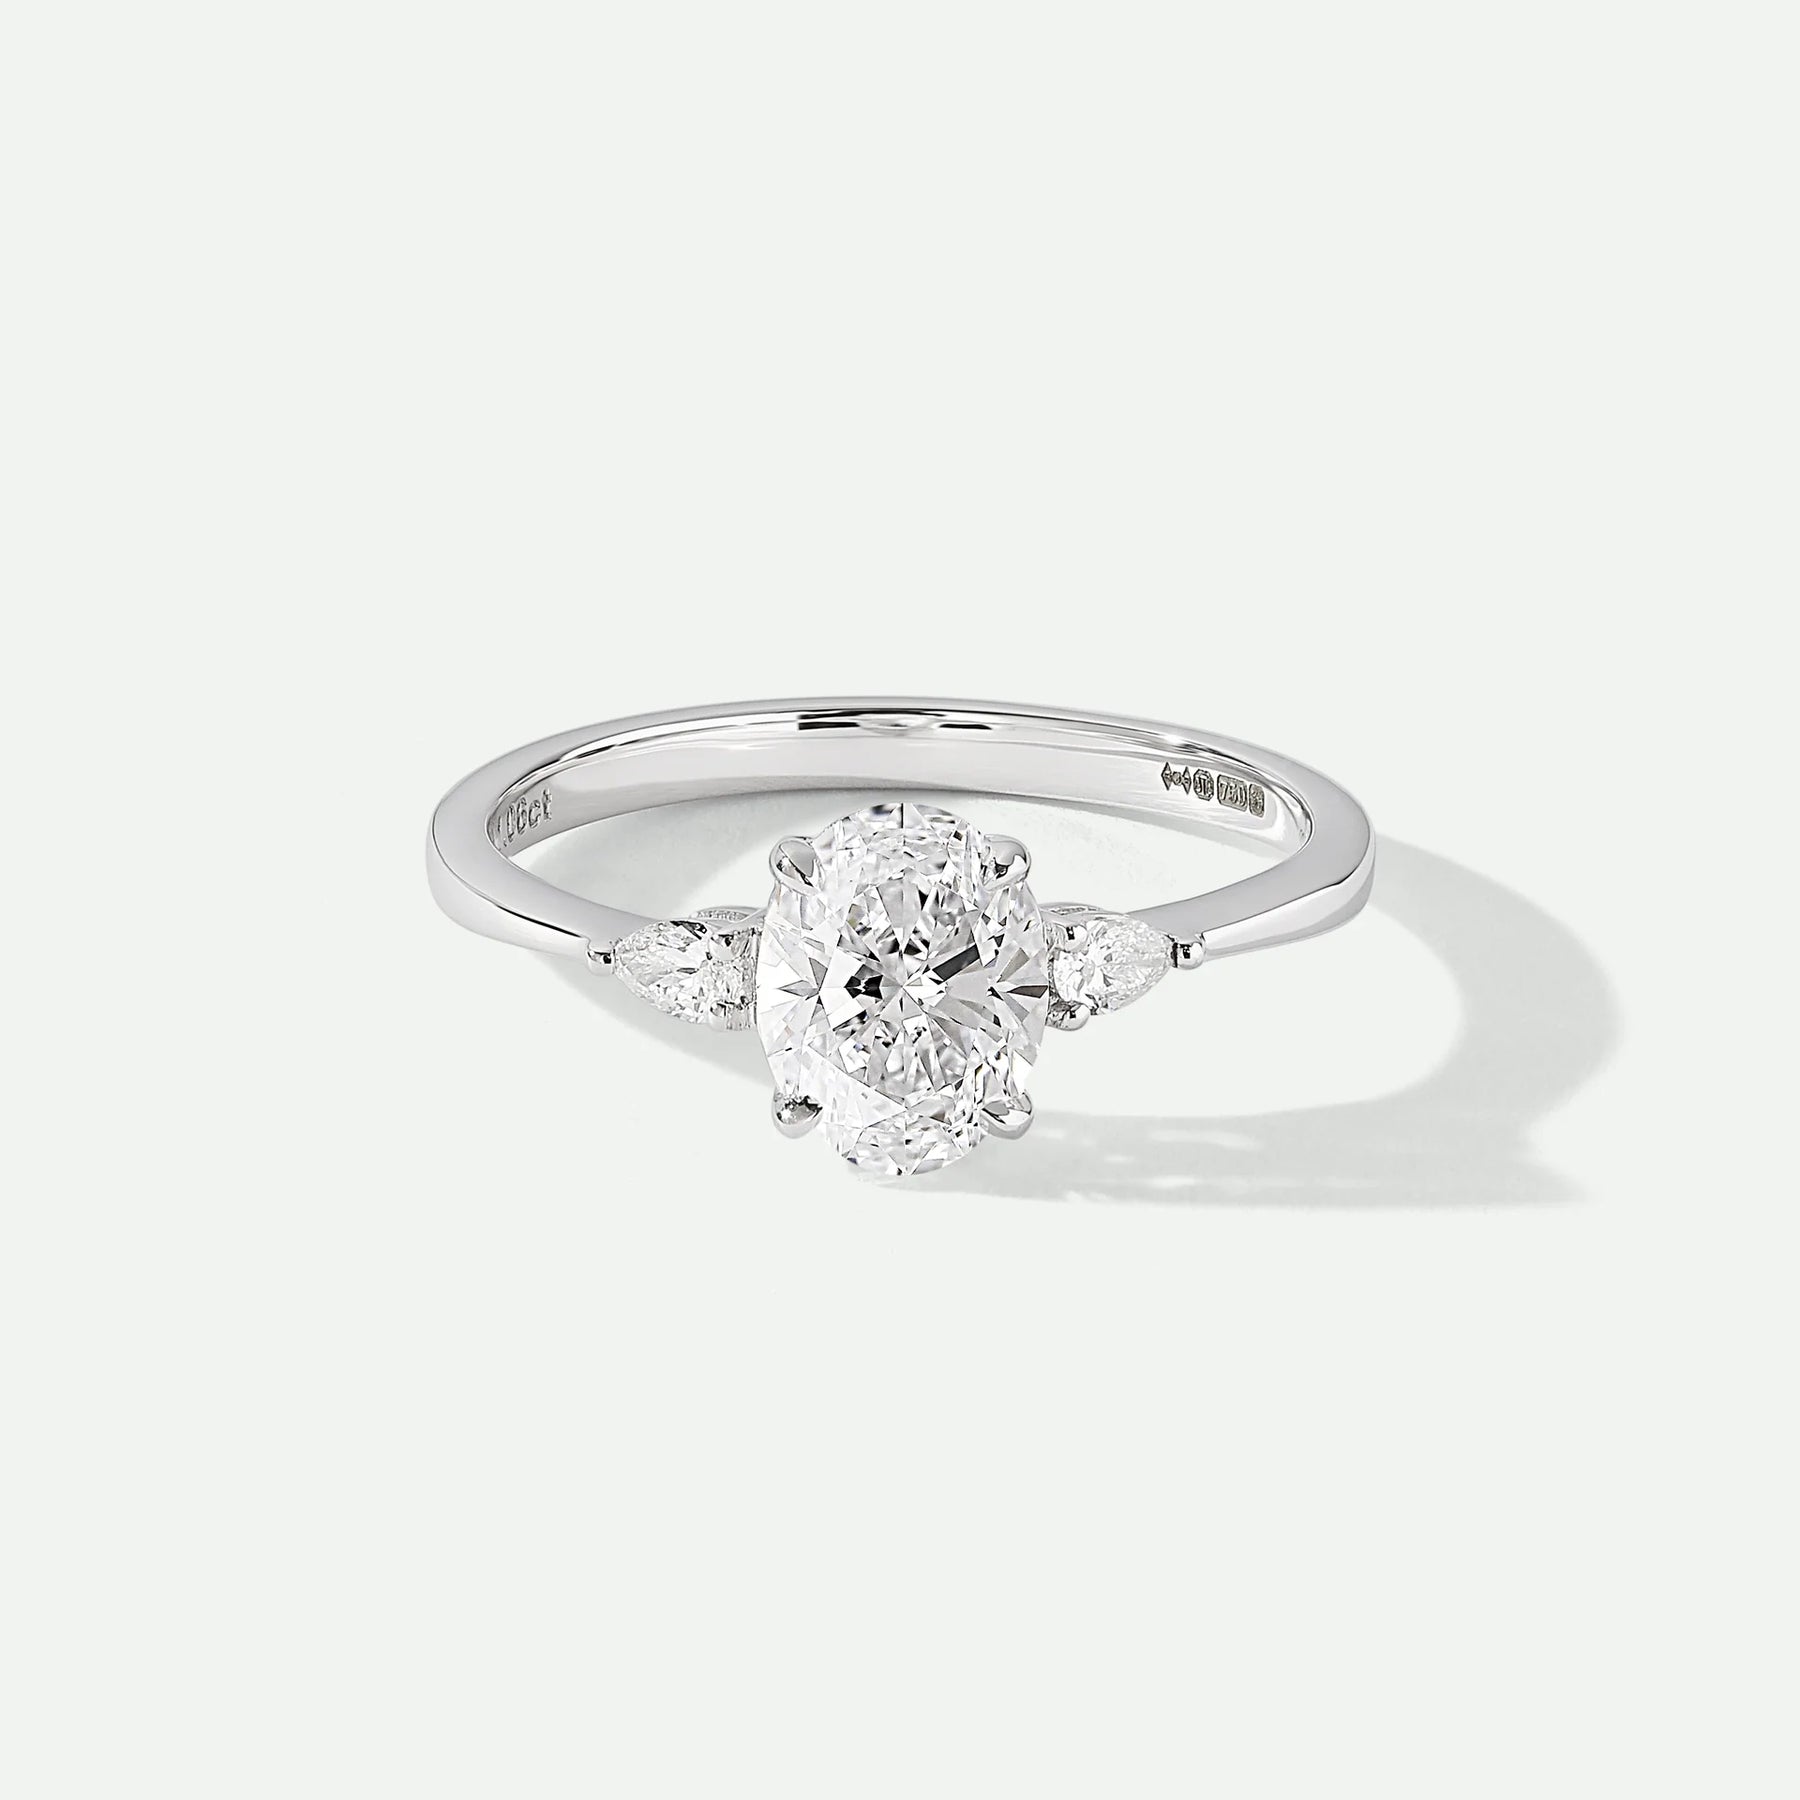 Engagement ring styles and designs